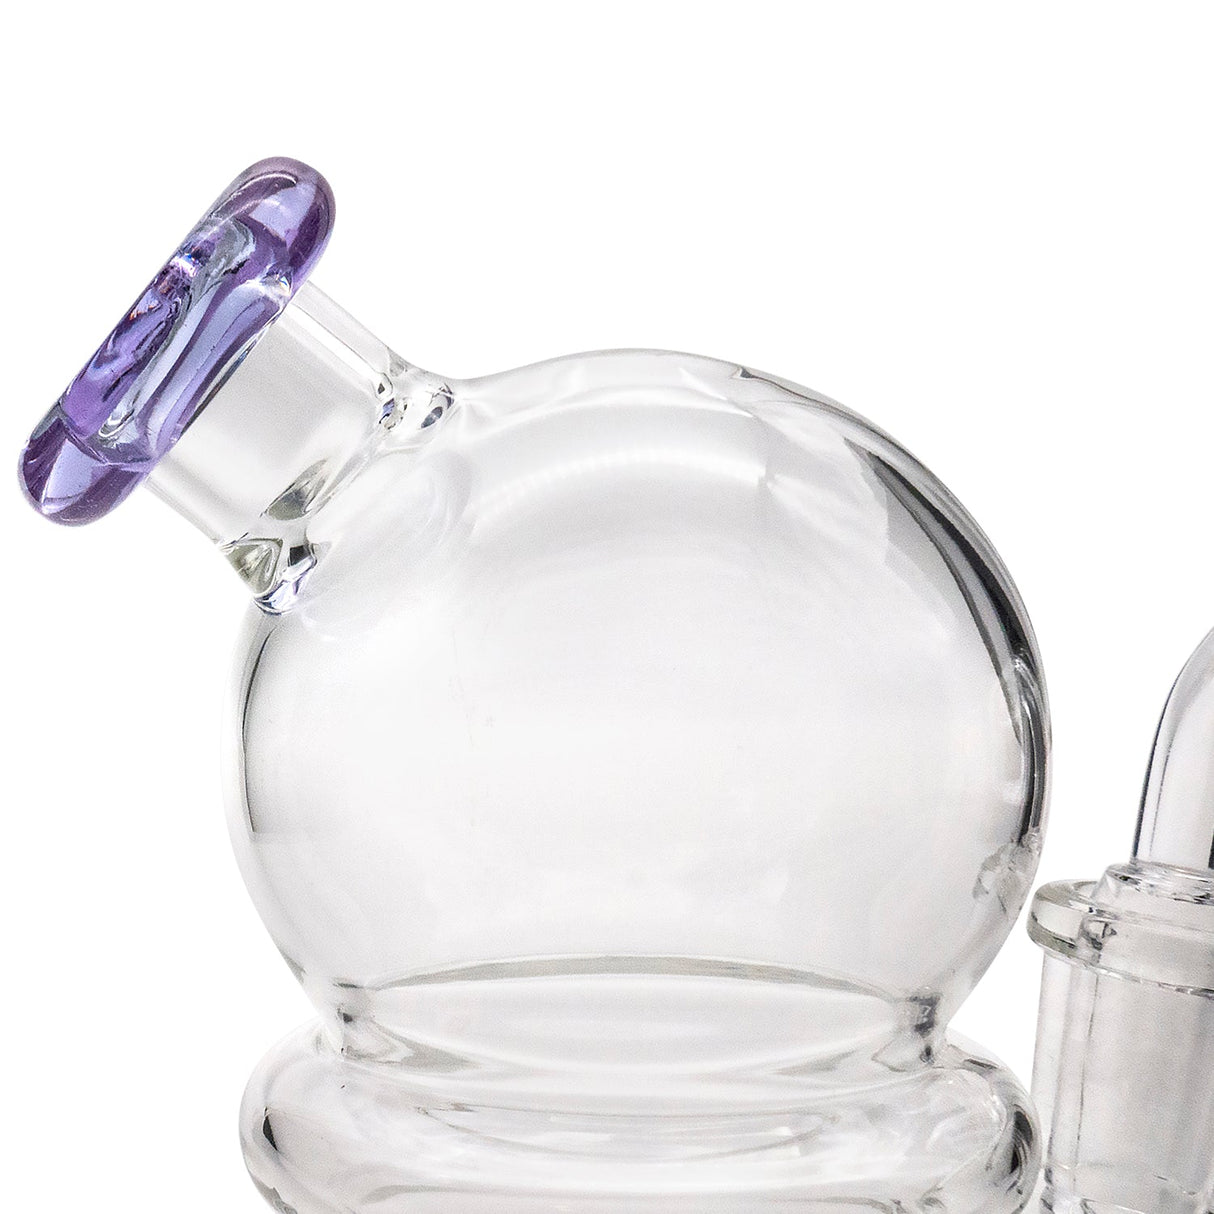 Glassic Compact Globe Banger Hanger Dab Rig, clear borosilicate glass, side view with purple accents